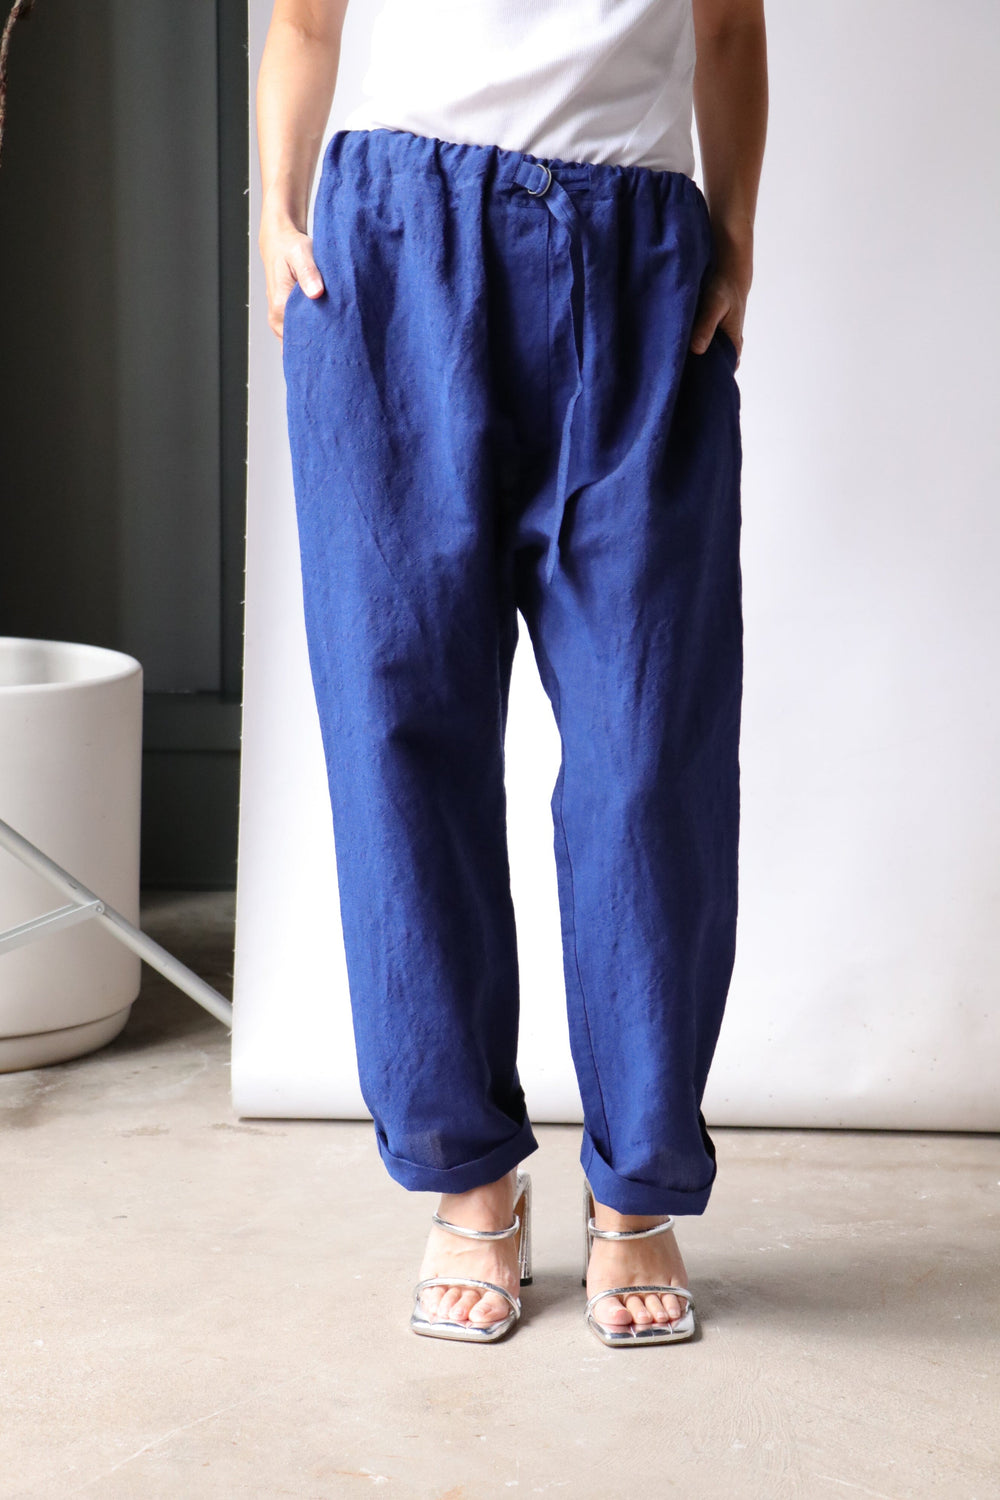 Buy Nightwear Pajamas For Women Online In India At Best Prices |  ielts-a-room.com